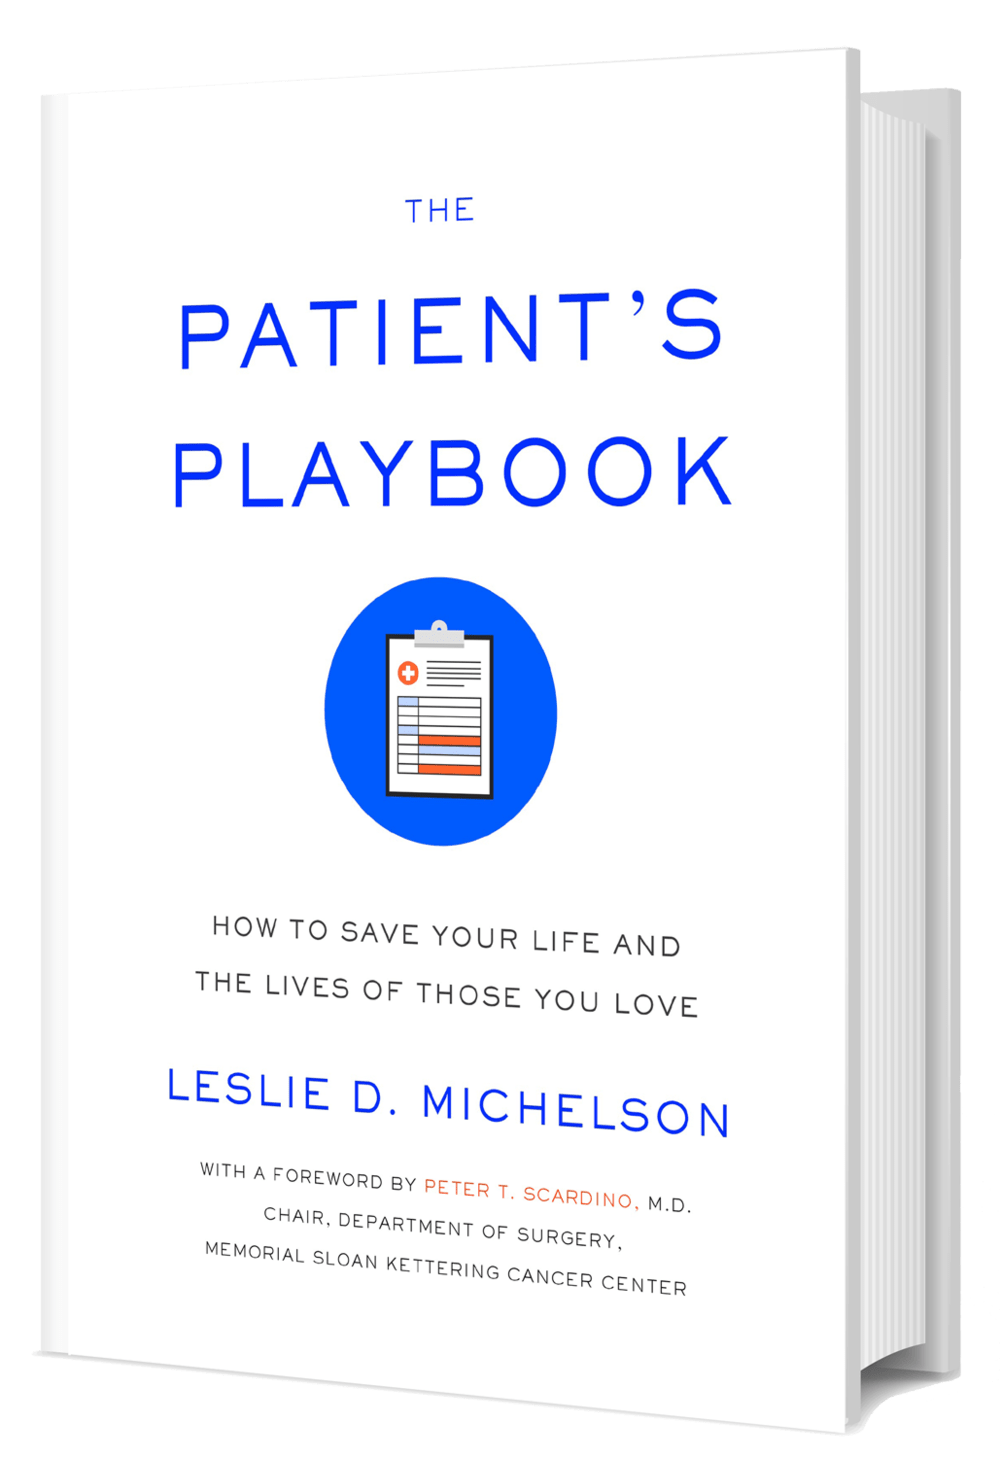 Health Book: The Patient's Playbook by Leslie D Michelson